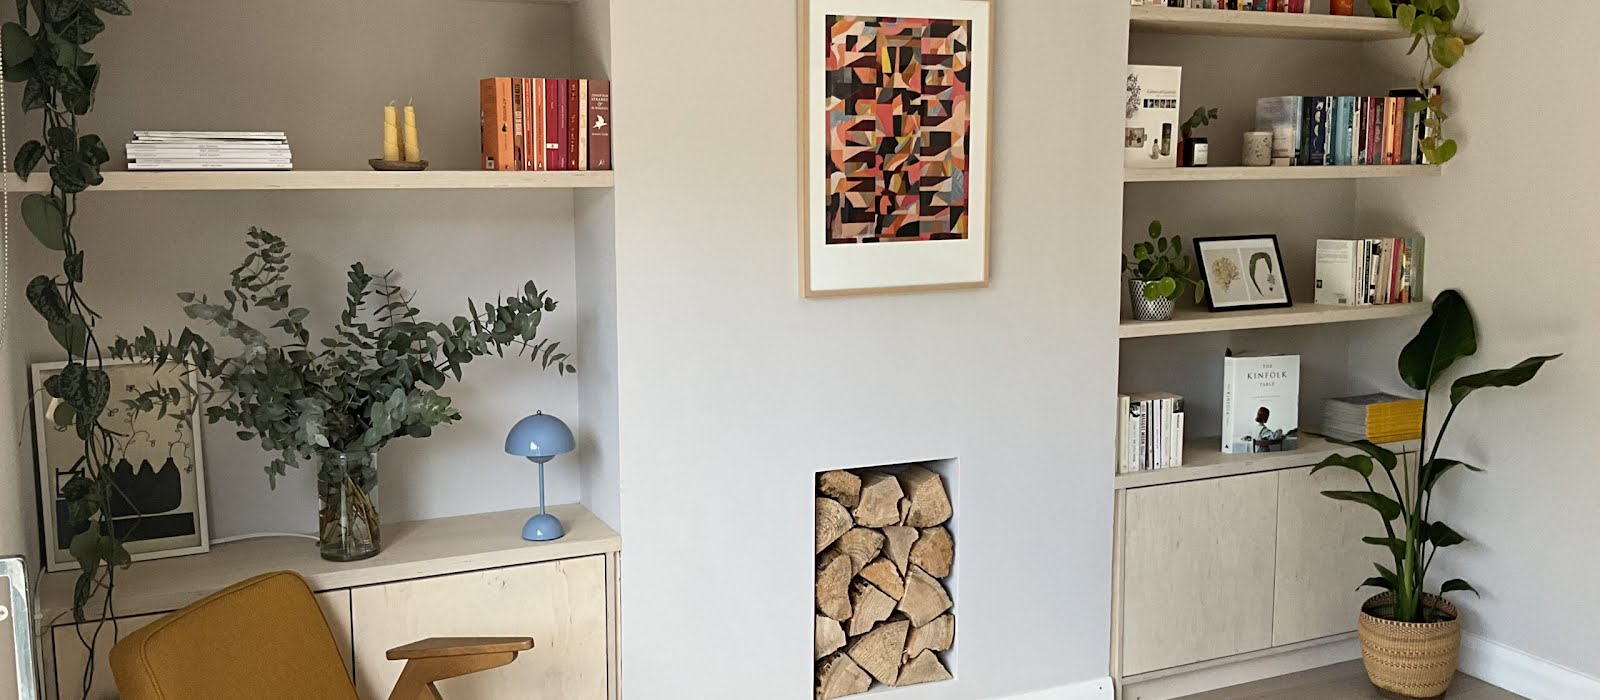 This Dun Laoghaire home has been given a makeover that adds colour and makes the most of its space